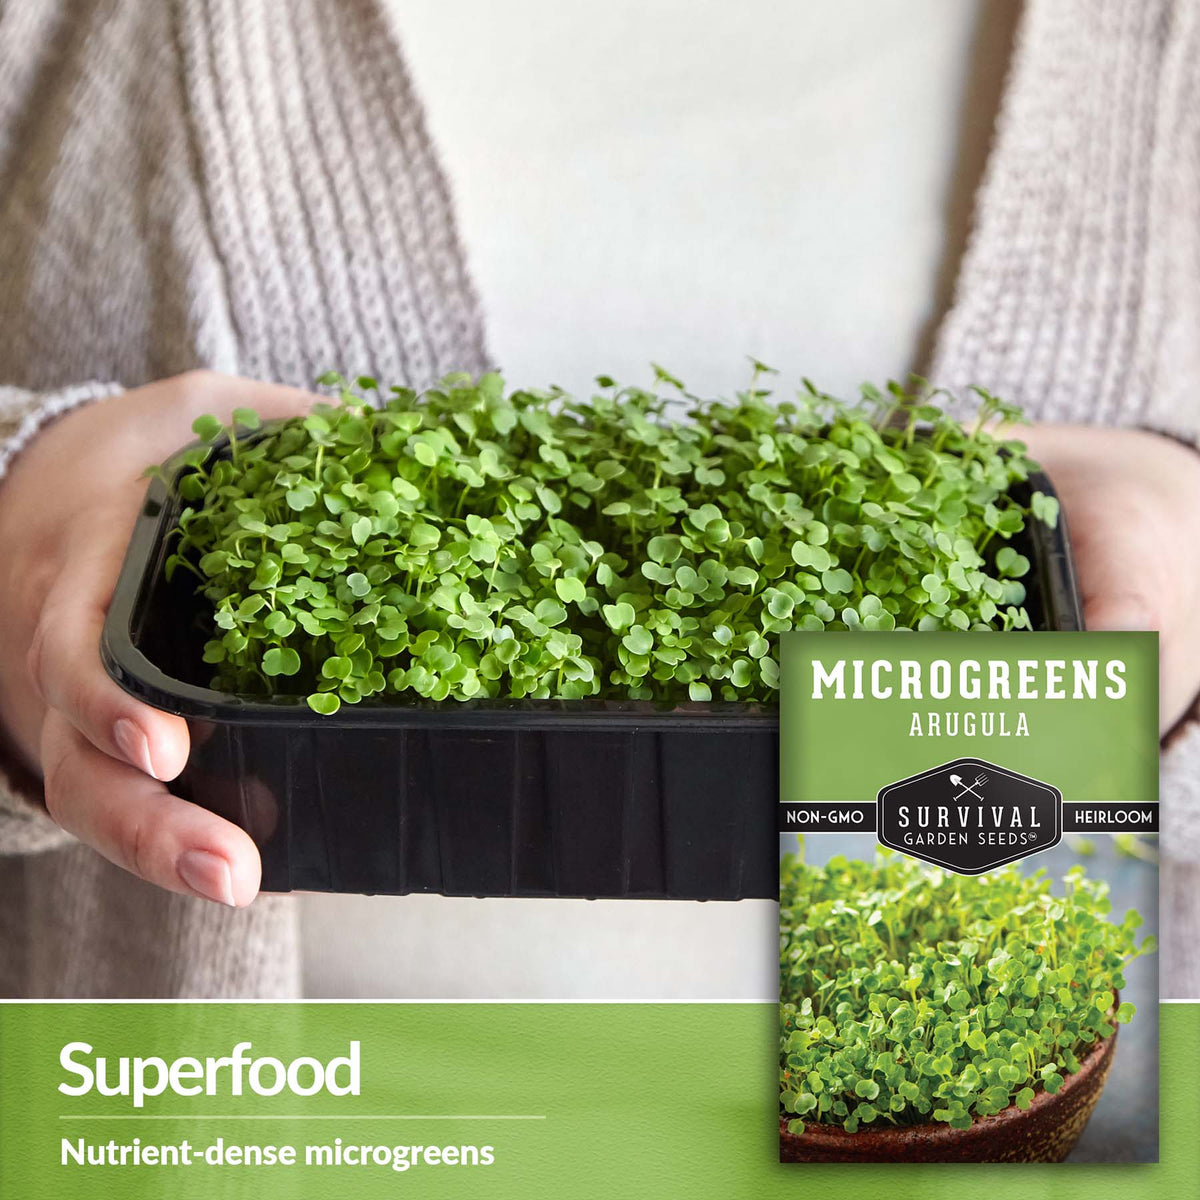 Microgreens are a nutrient dense superfood